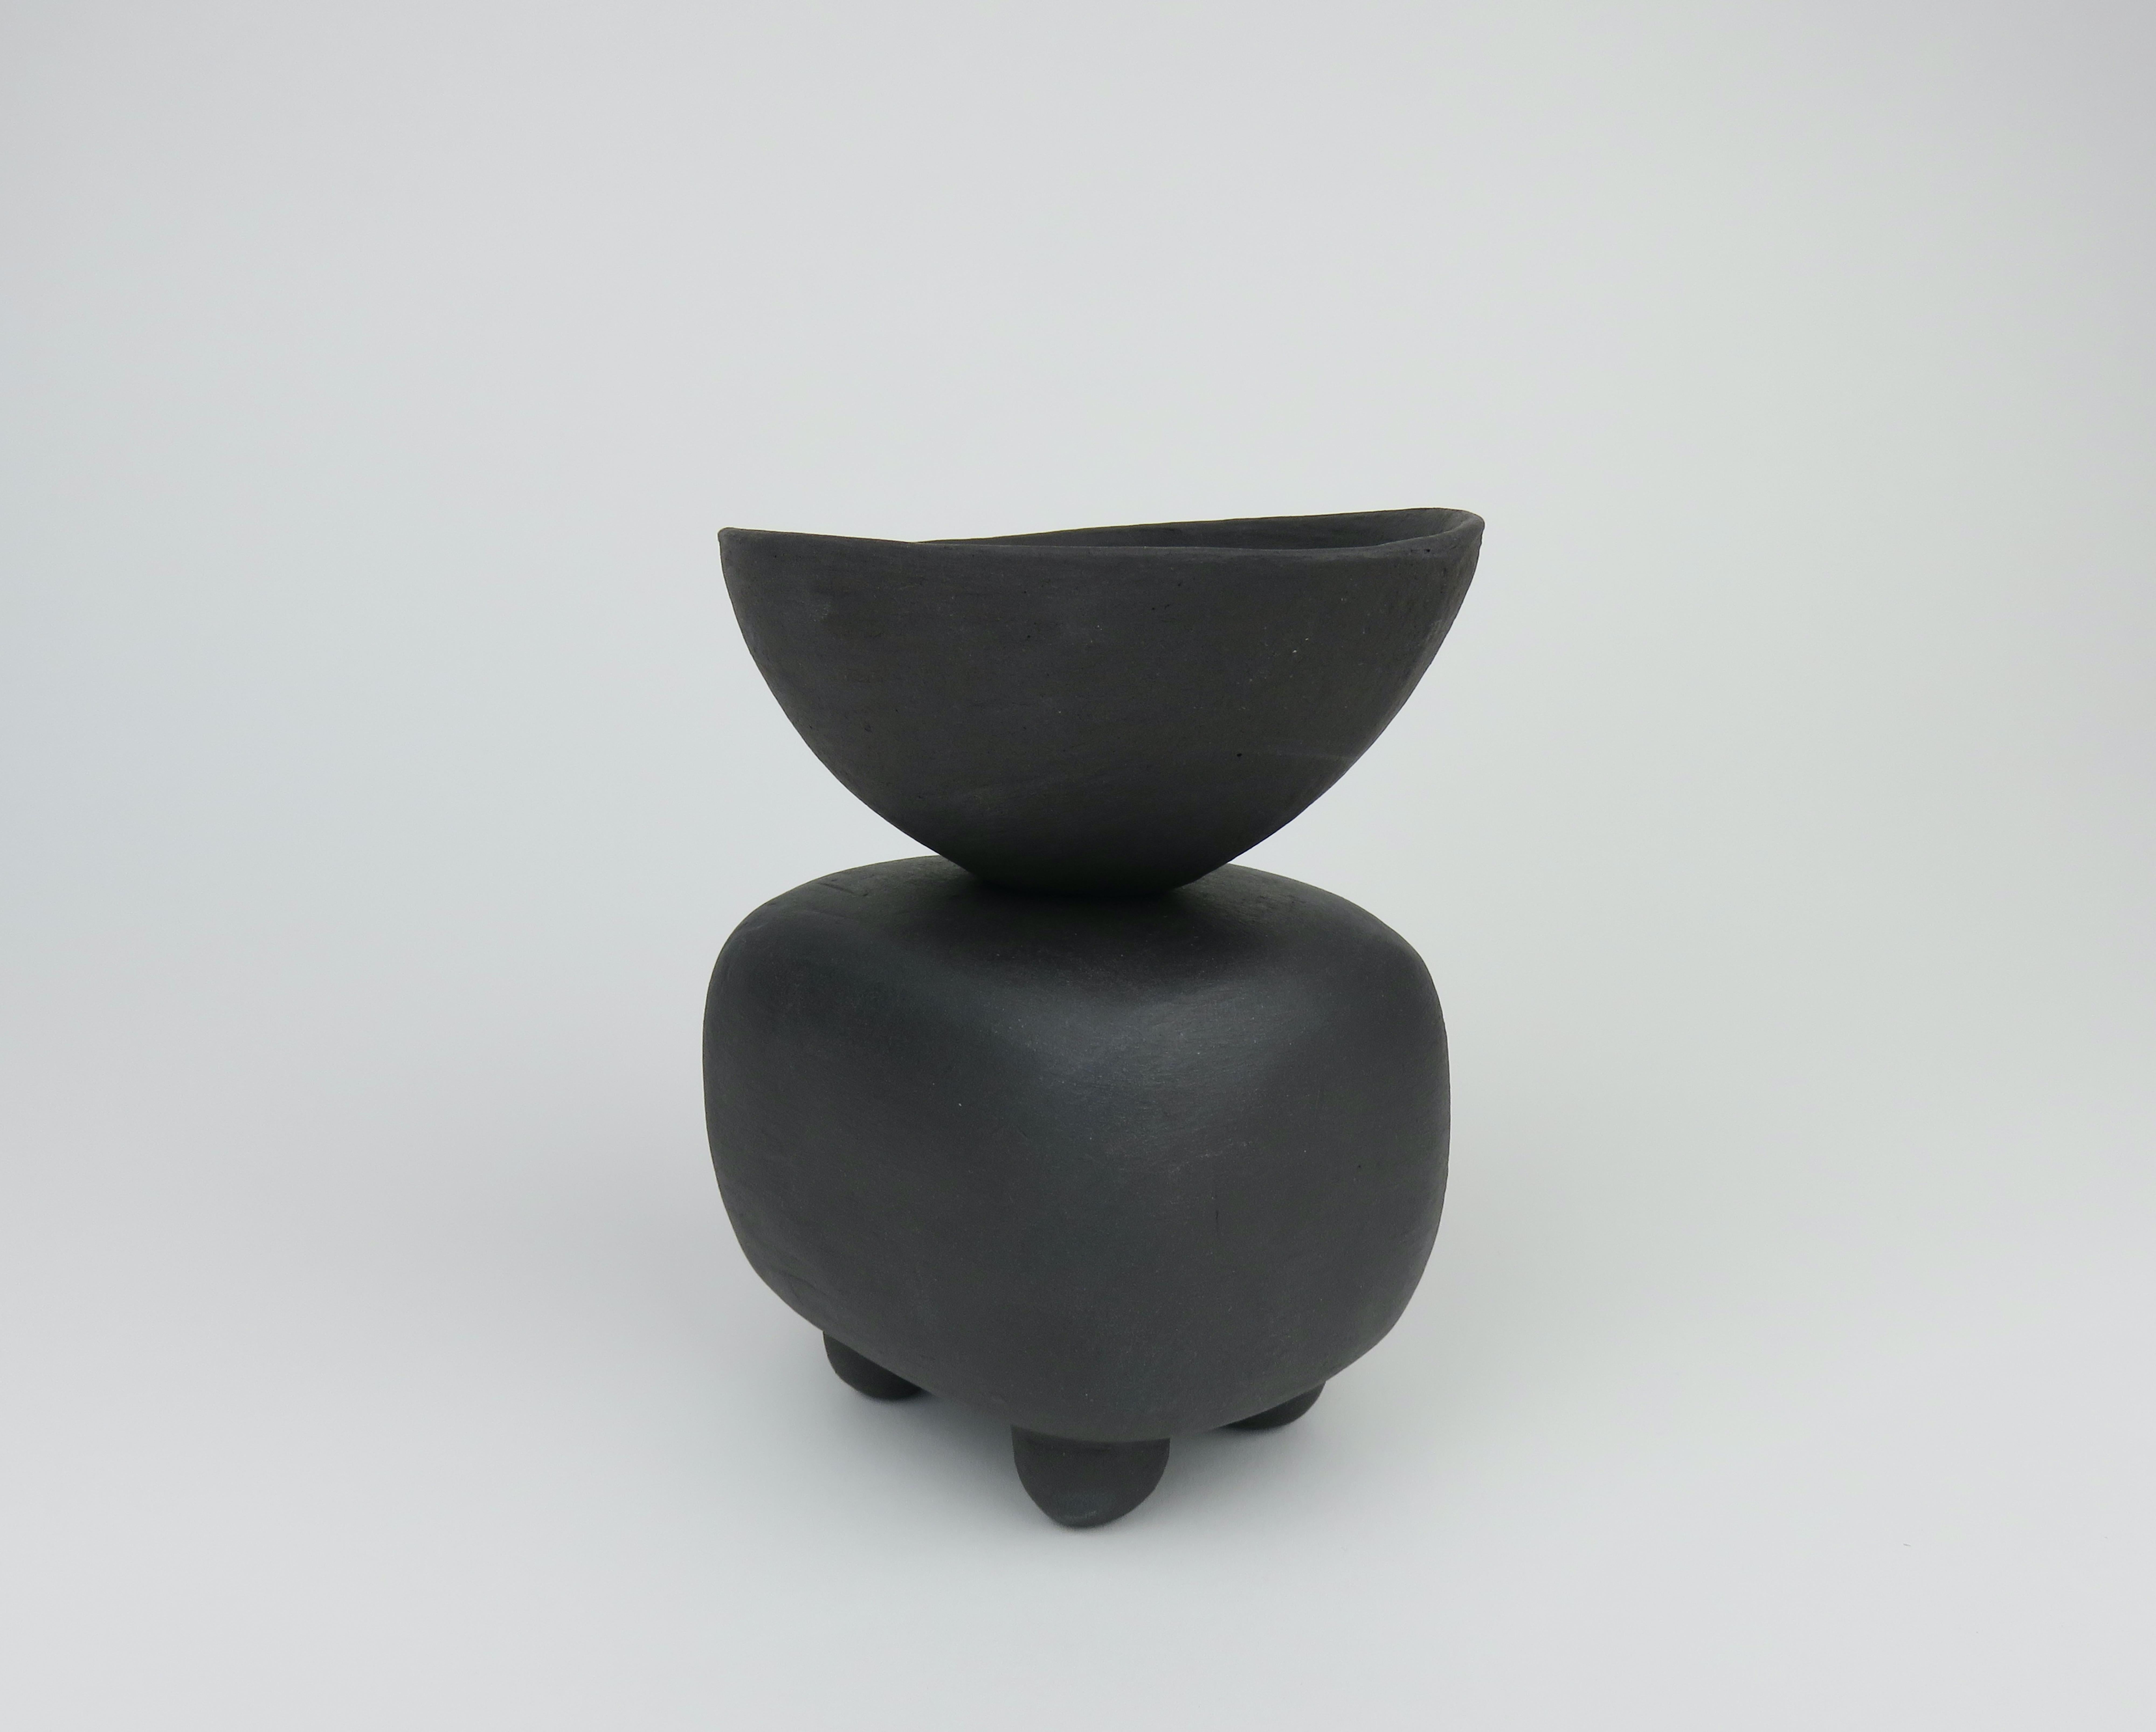 This new series of modern TOTEMS consists of soft round or rectangular forms on small feet. This piece has a rectangular body with a deep, angled bowl on top. The cube shape was formed of a solid piece, hollowed out, then stacked and placed on feet.